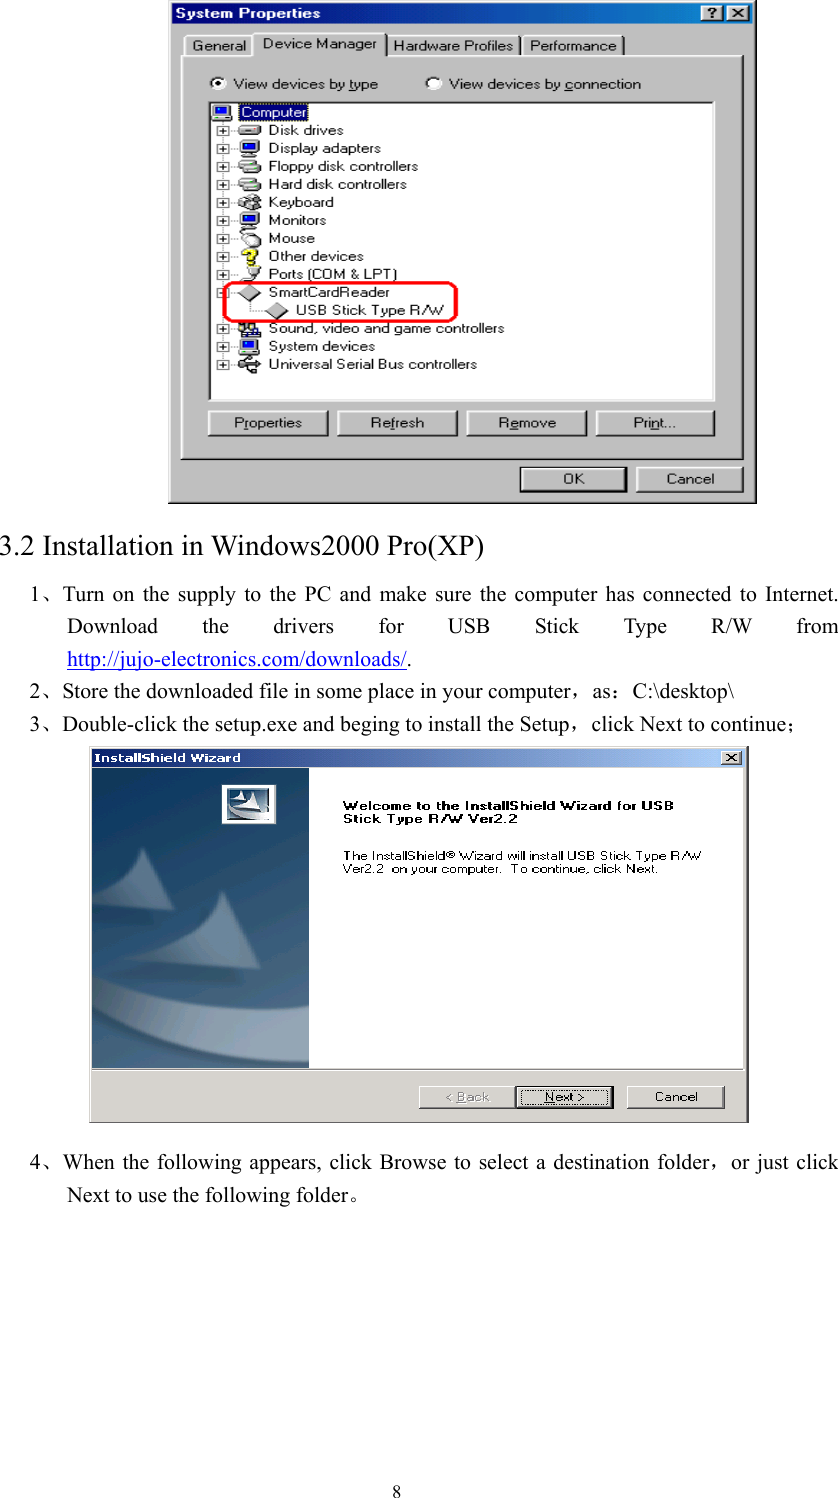  8  3.2 Installation in Windows2000 Pro(XP)  1 、Turn on the supply to the PC and make sure the computer has connected to Internet. Download the drivers for USB Stick Type R/W from http://jujo-electronics.com/downloads/. 2、Store the downloaded file in some place in your computer，as：C:\desktop\  3、Double-click the setup.exe and beging to install the Setup，click Next to continue；  4、When the following appears, click Browse to select a destination folder，or just click Next to use the following folder。 